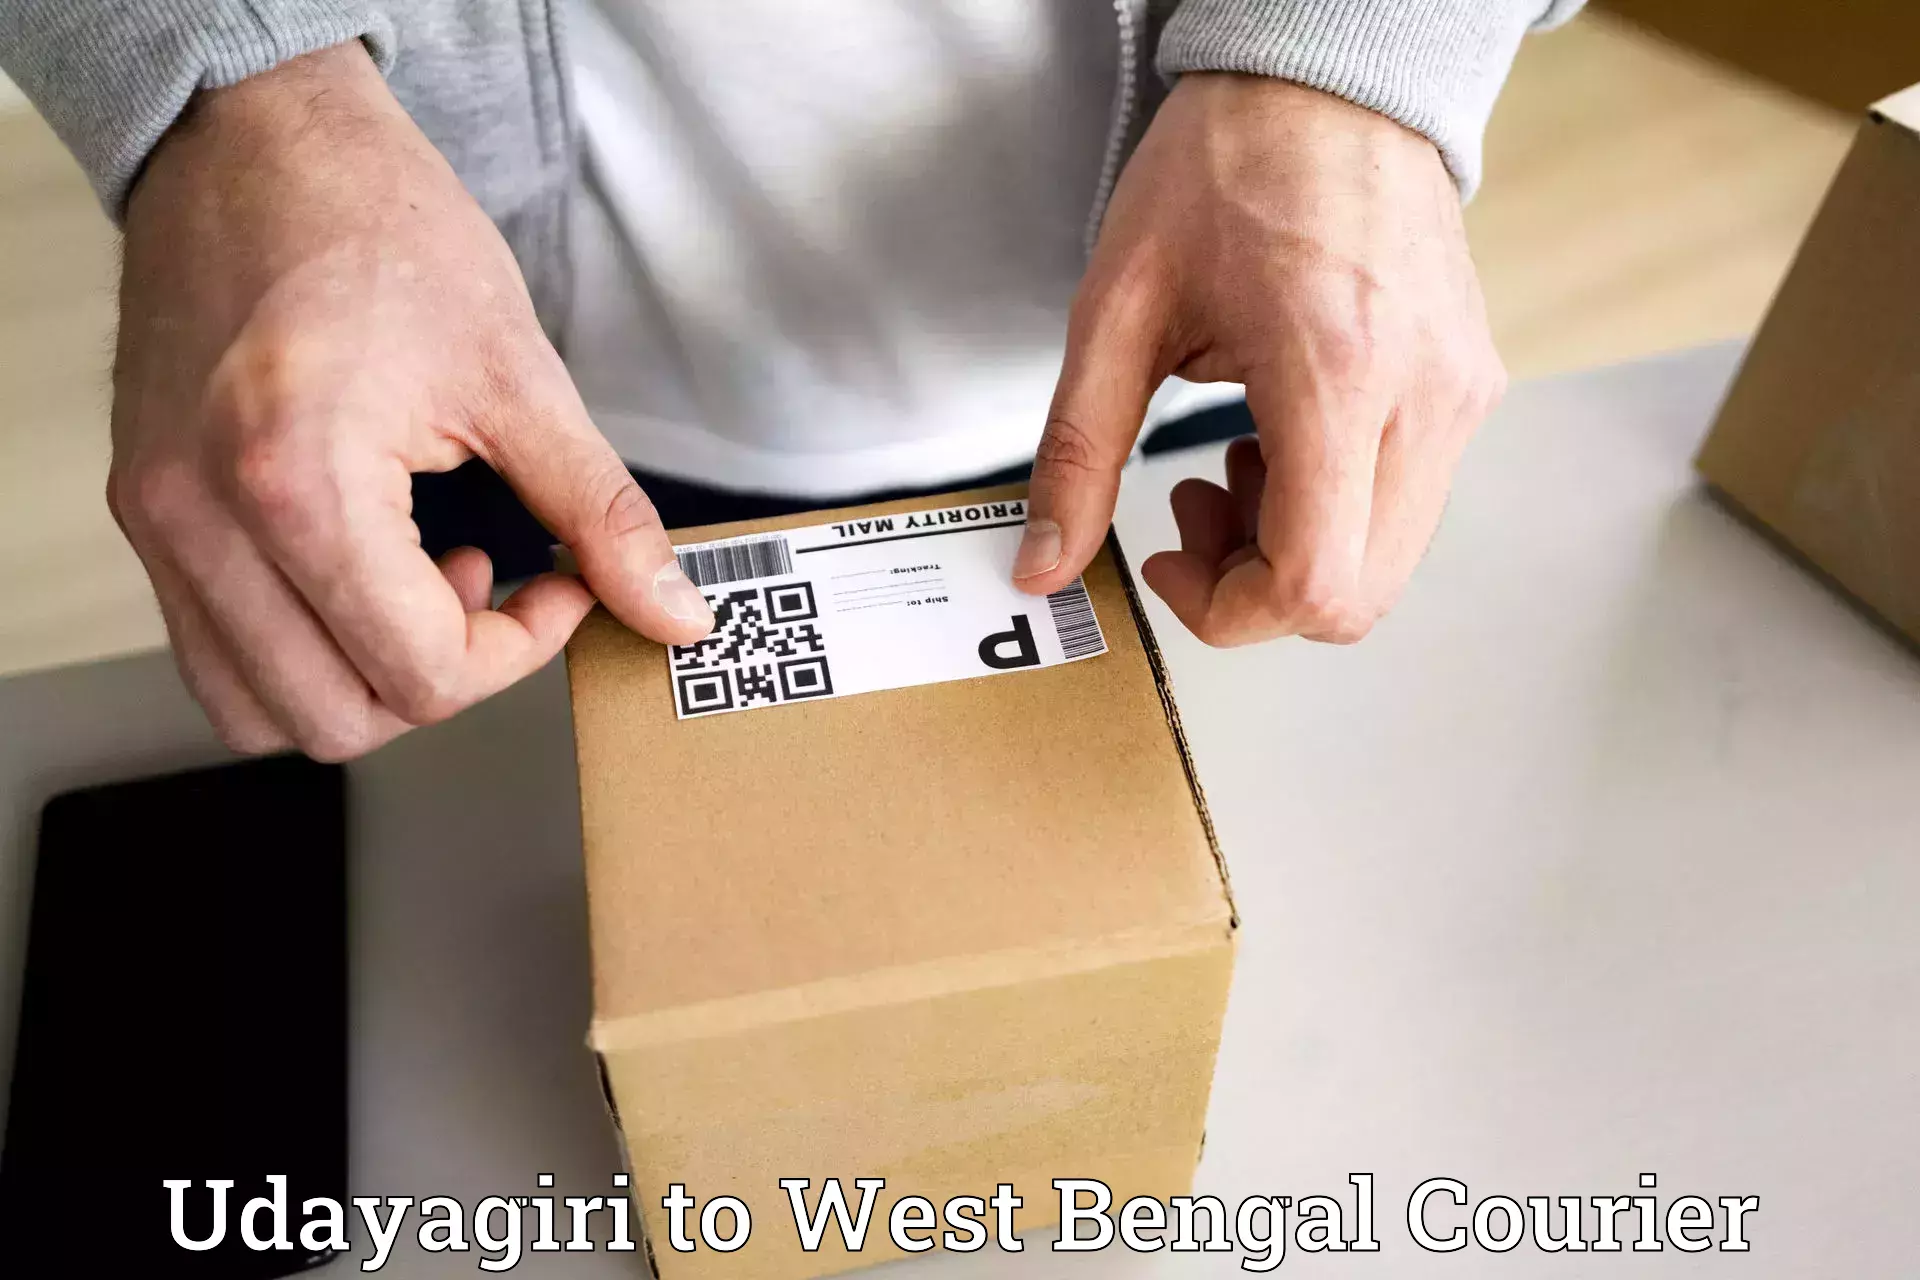 Efficient package consolidation Udayagiri to West Bengal